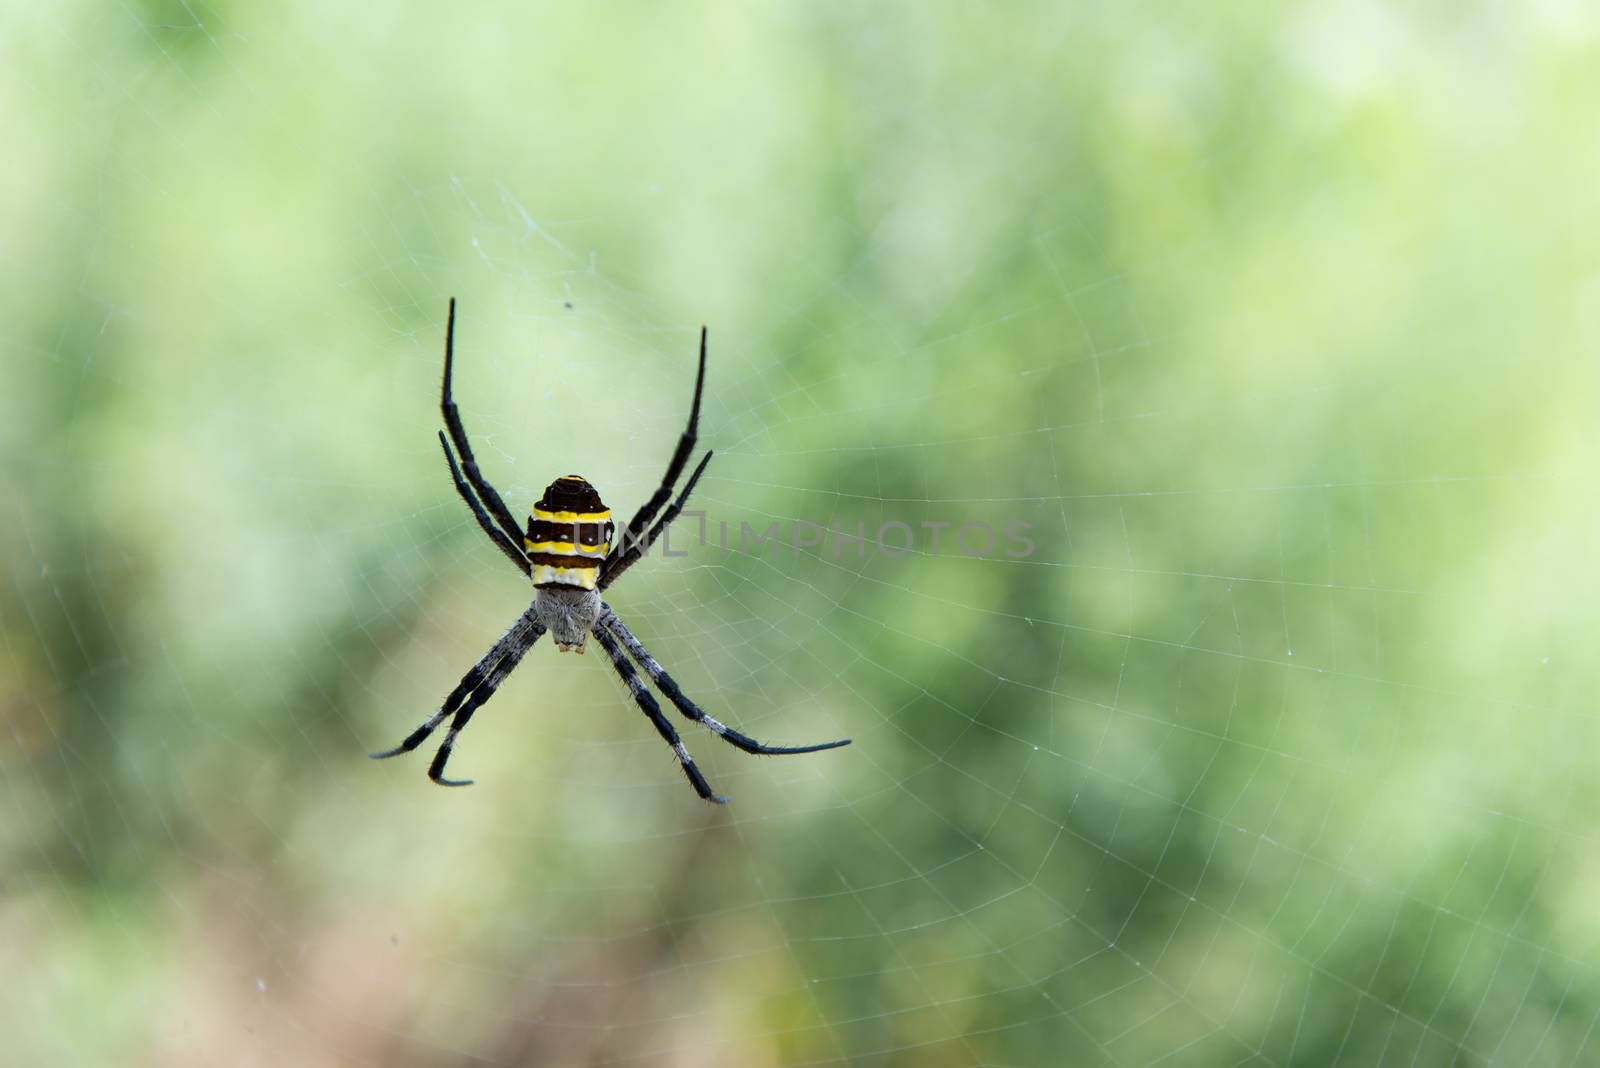 Argiope sp. spider from South Korea close to Yeosu in its spider web